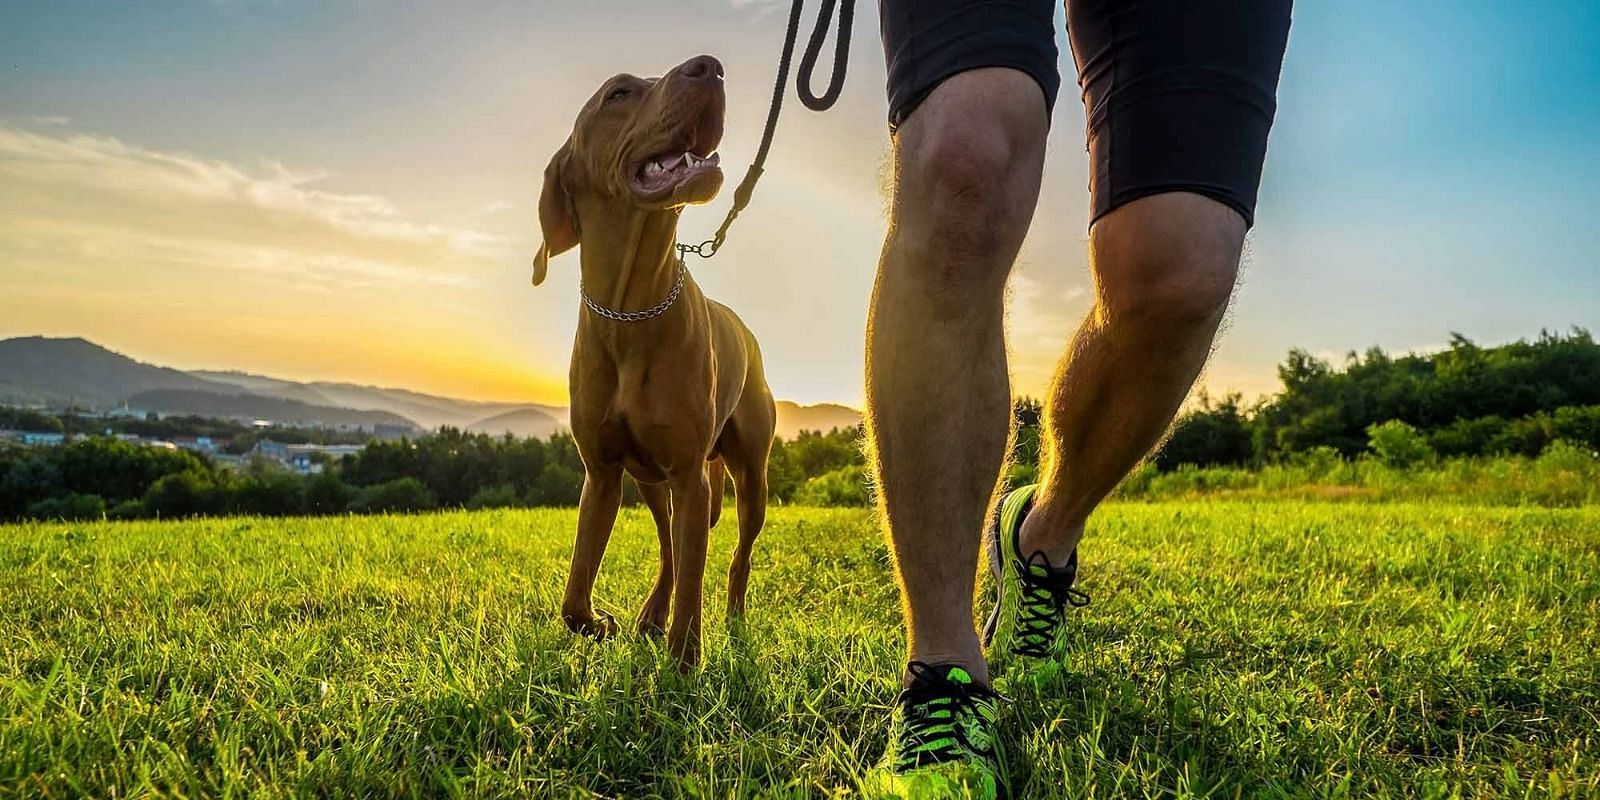 Workout with dog (Image via Pexels/Zen Chung)